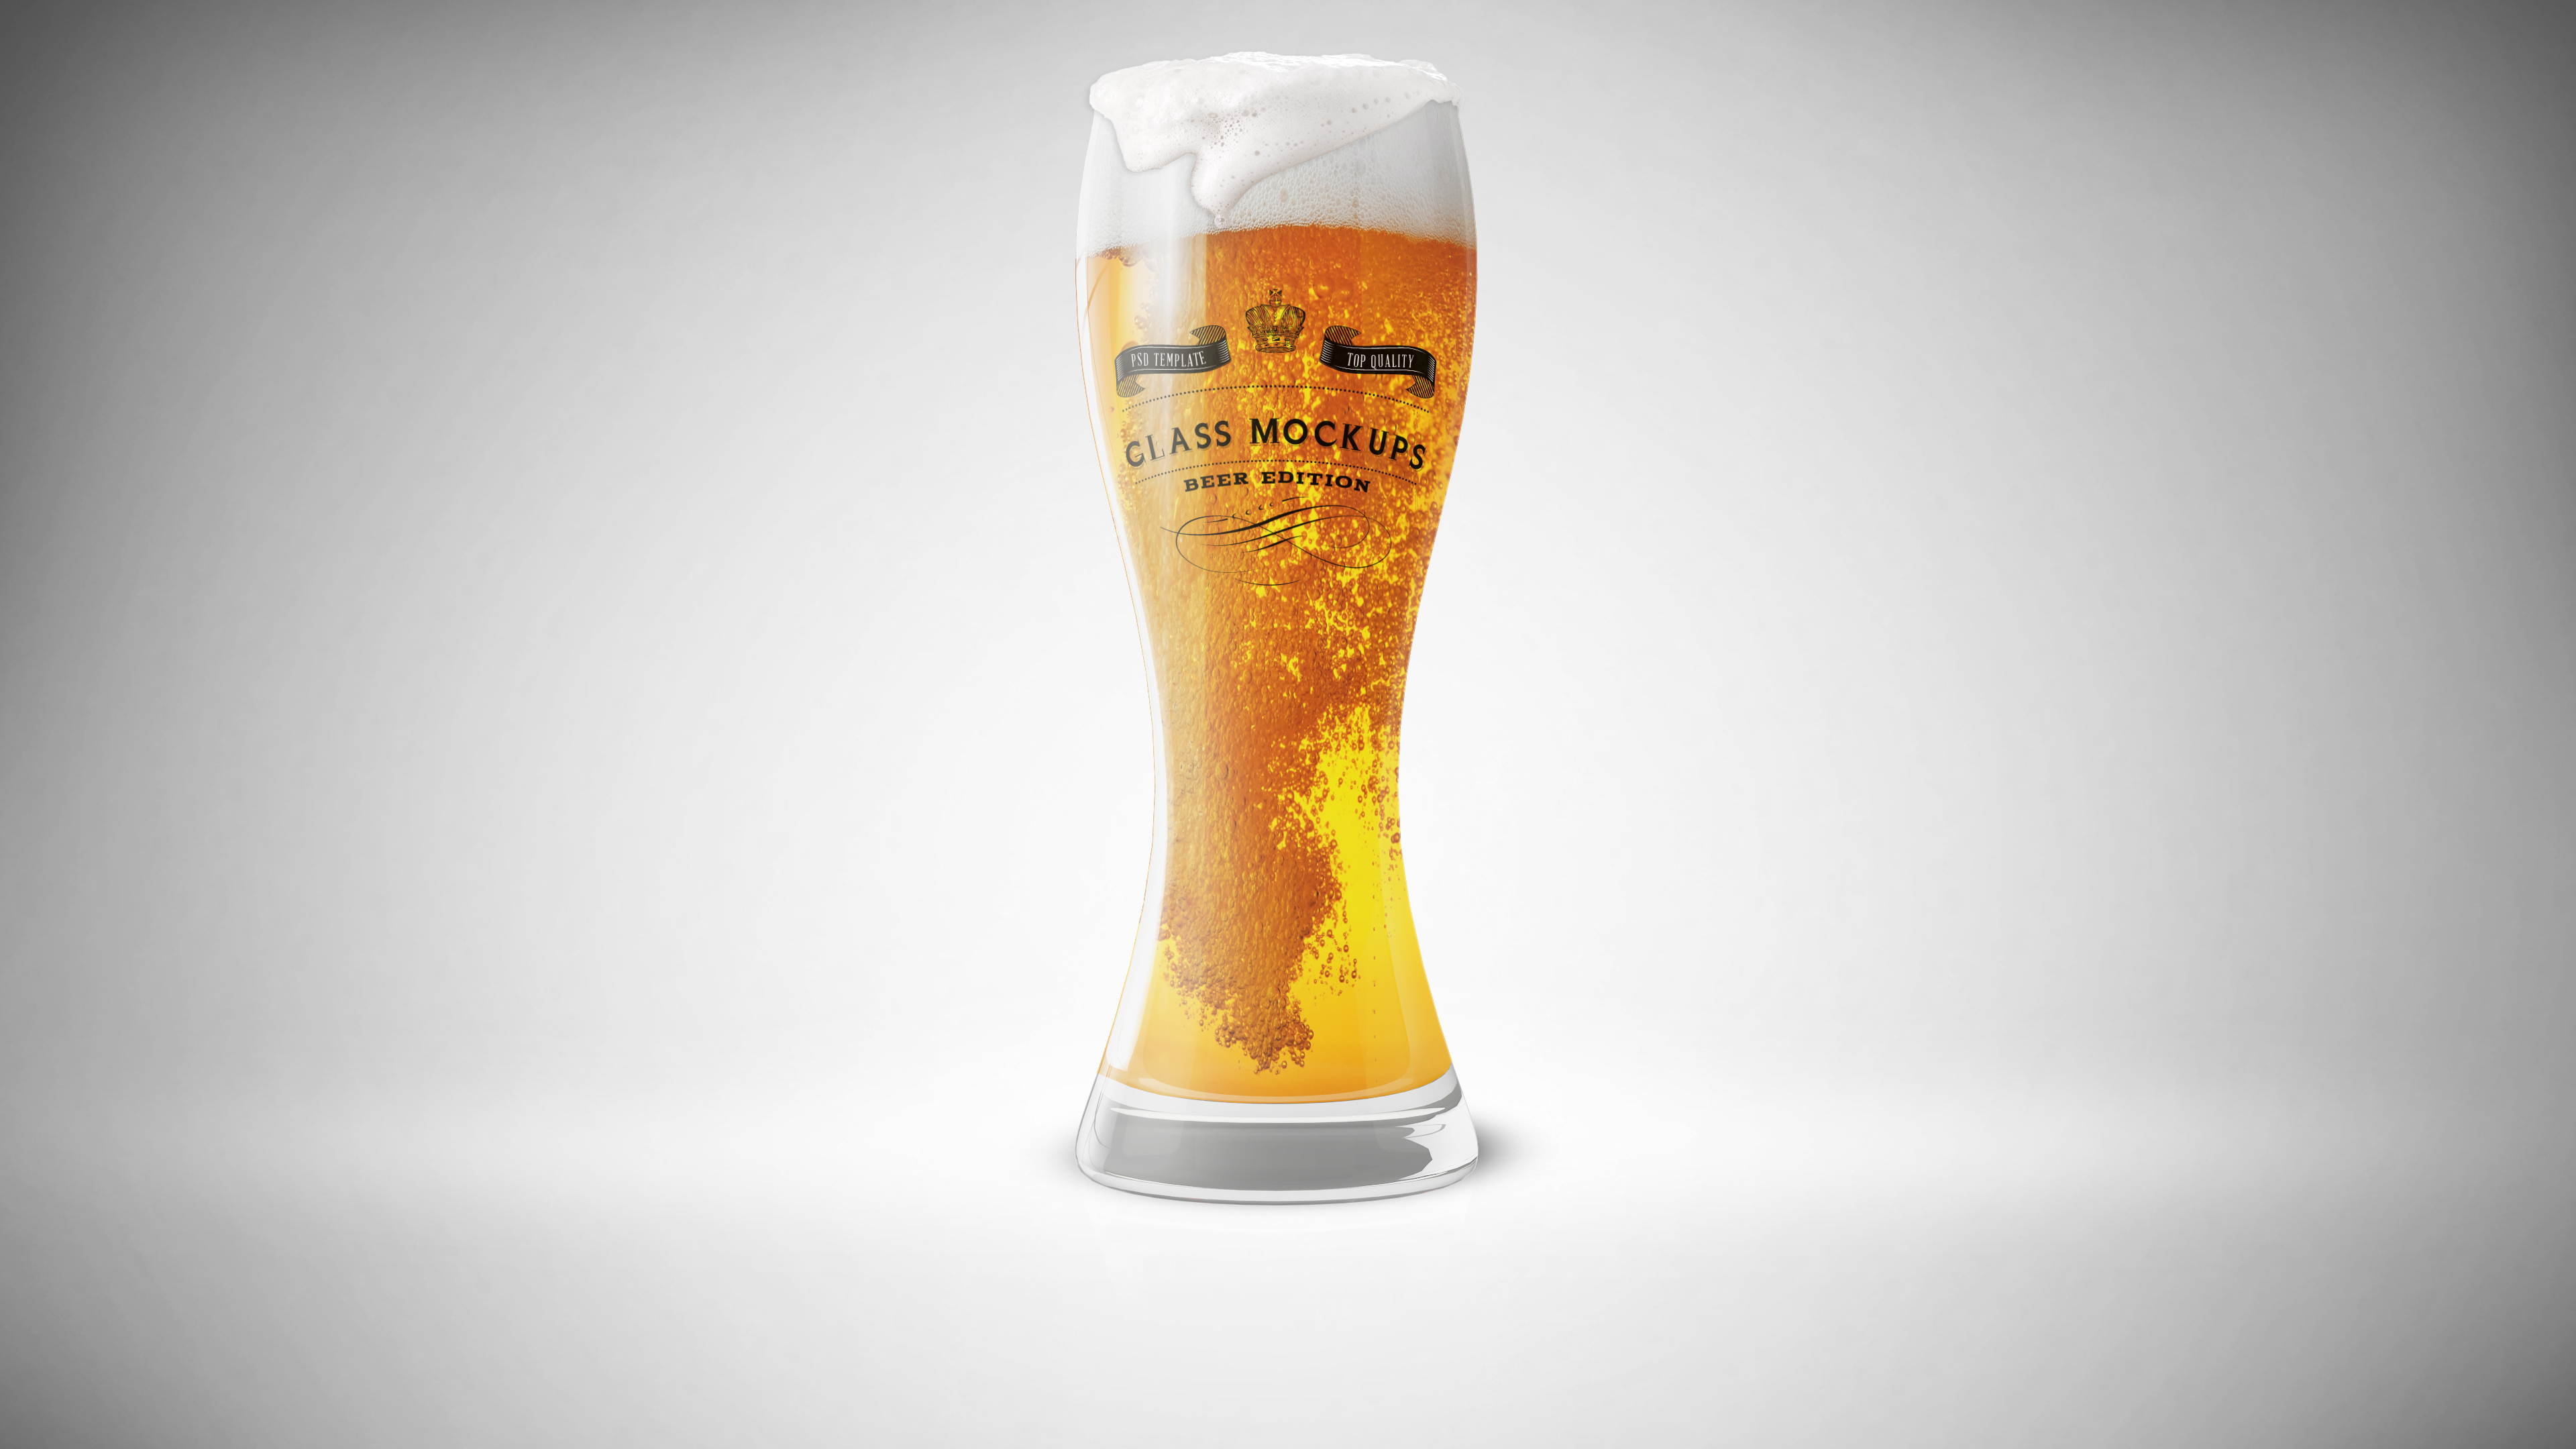 Download Mockup Beer Glass Free / Beer glass and bottle with label mockup | Free PSD File : Today's ...